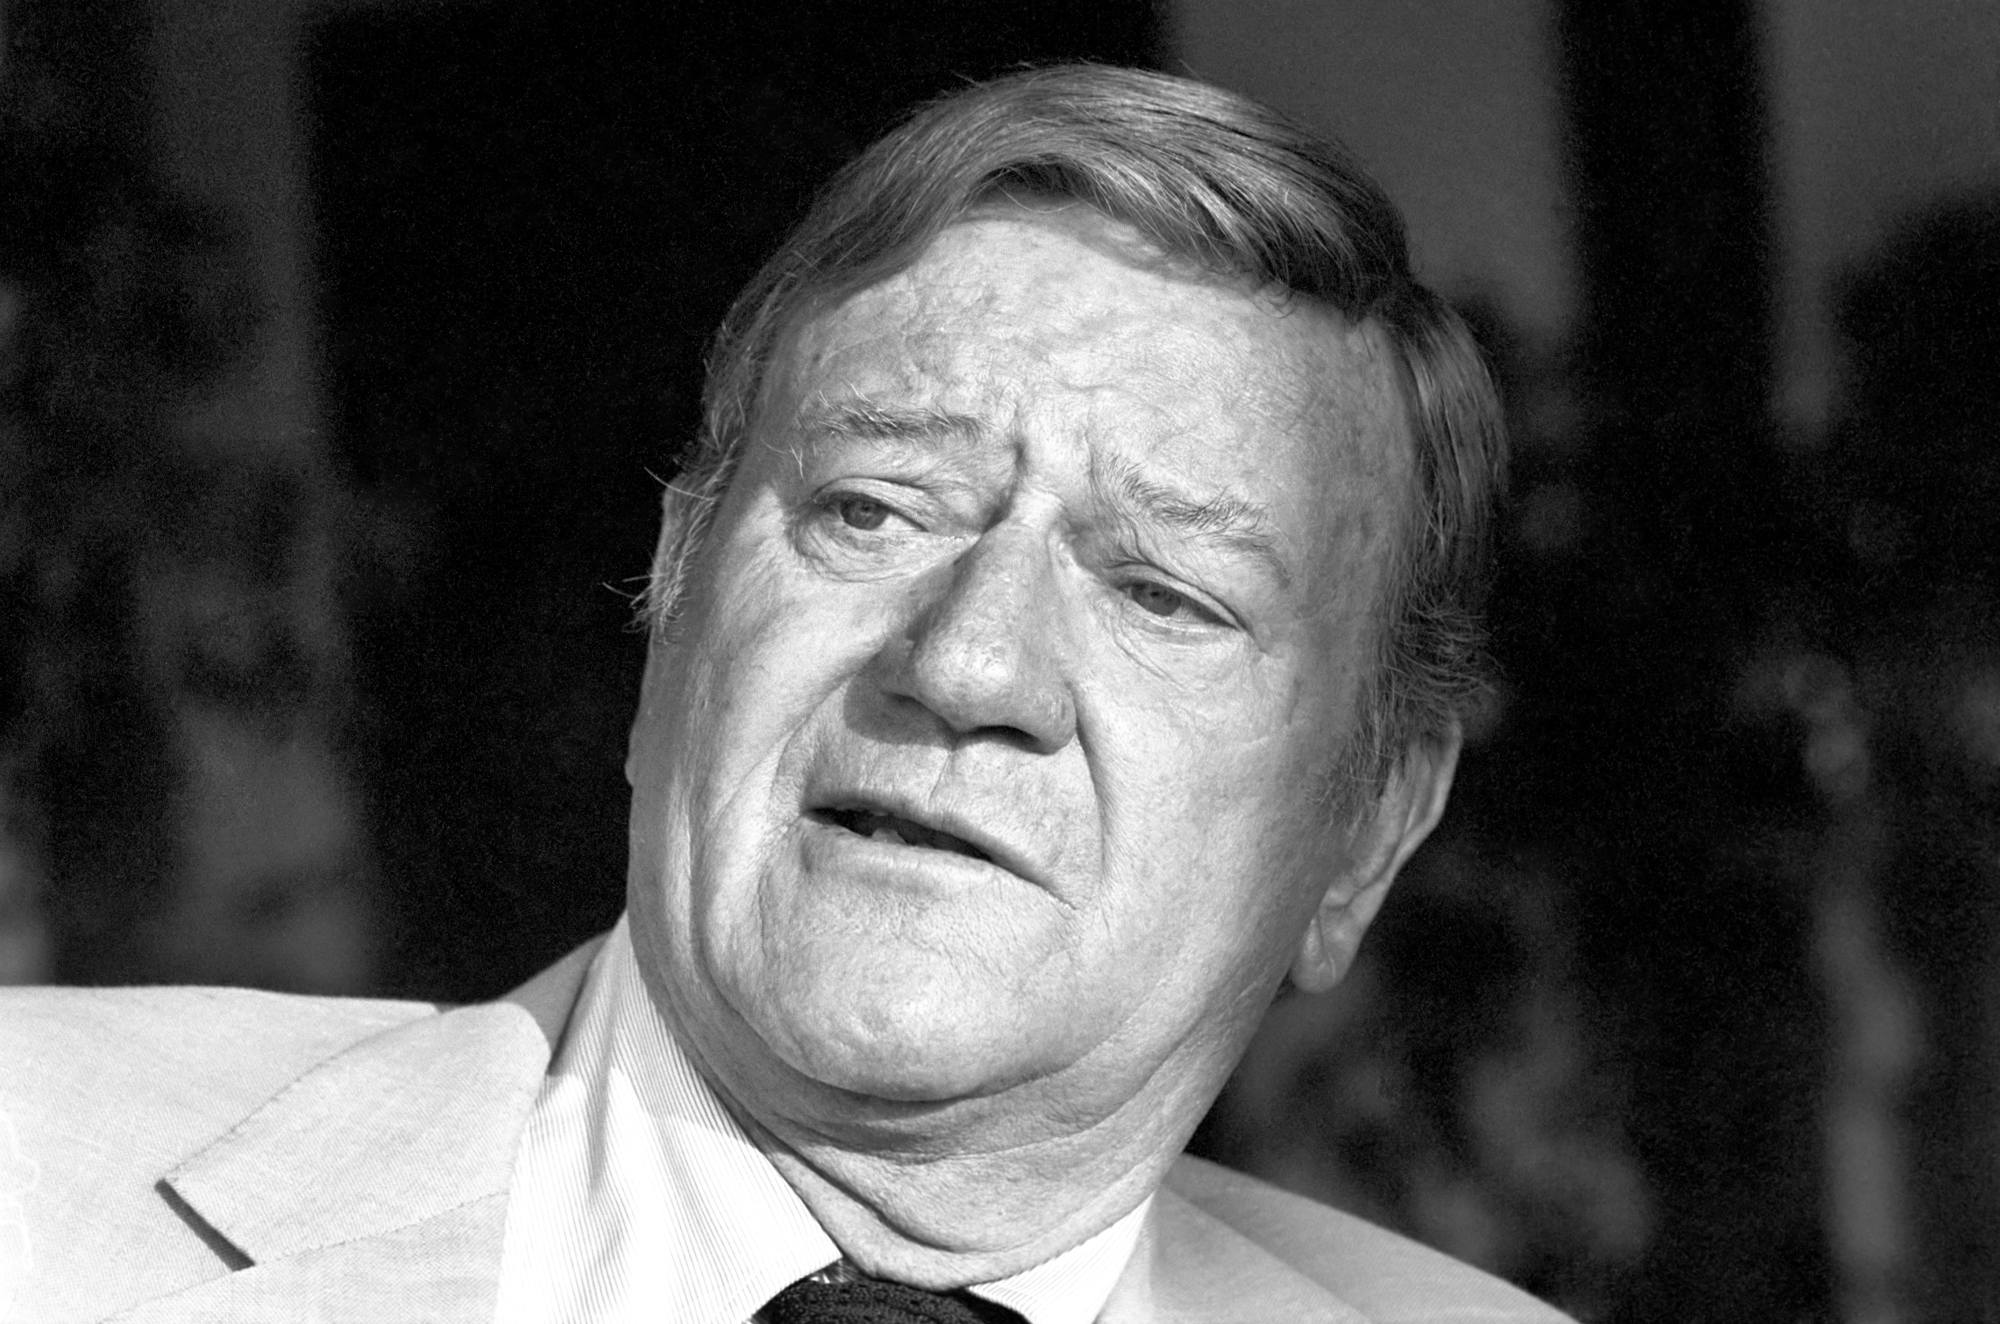 Movie star John Wayne in black-and-white photo wearing a suit